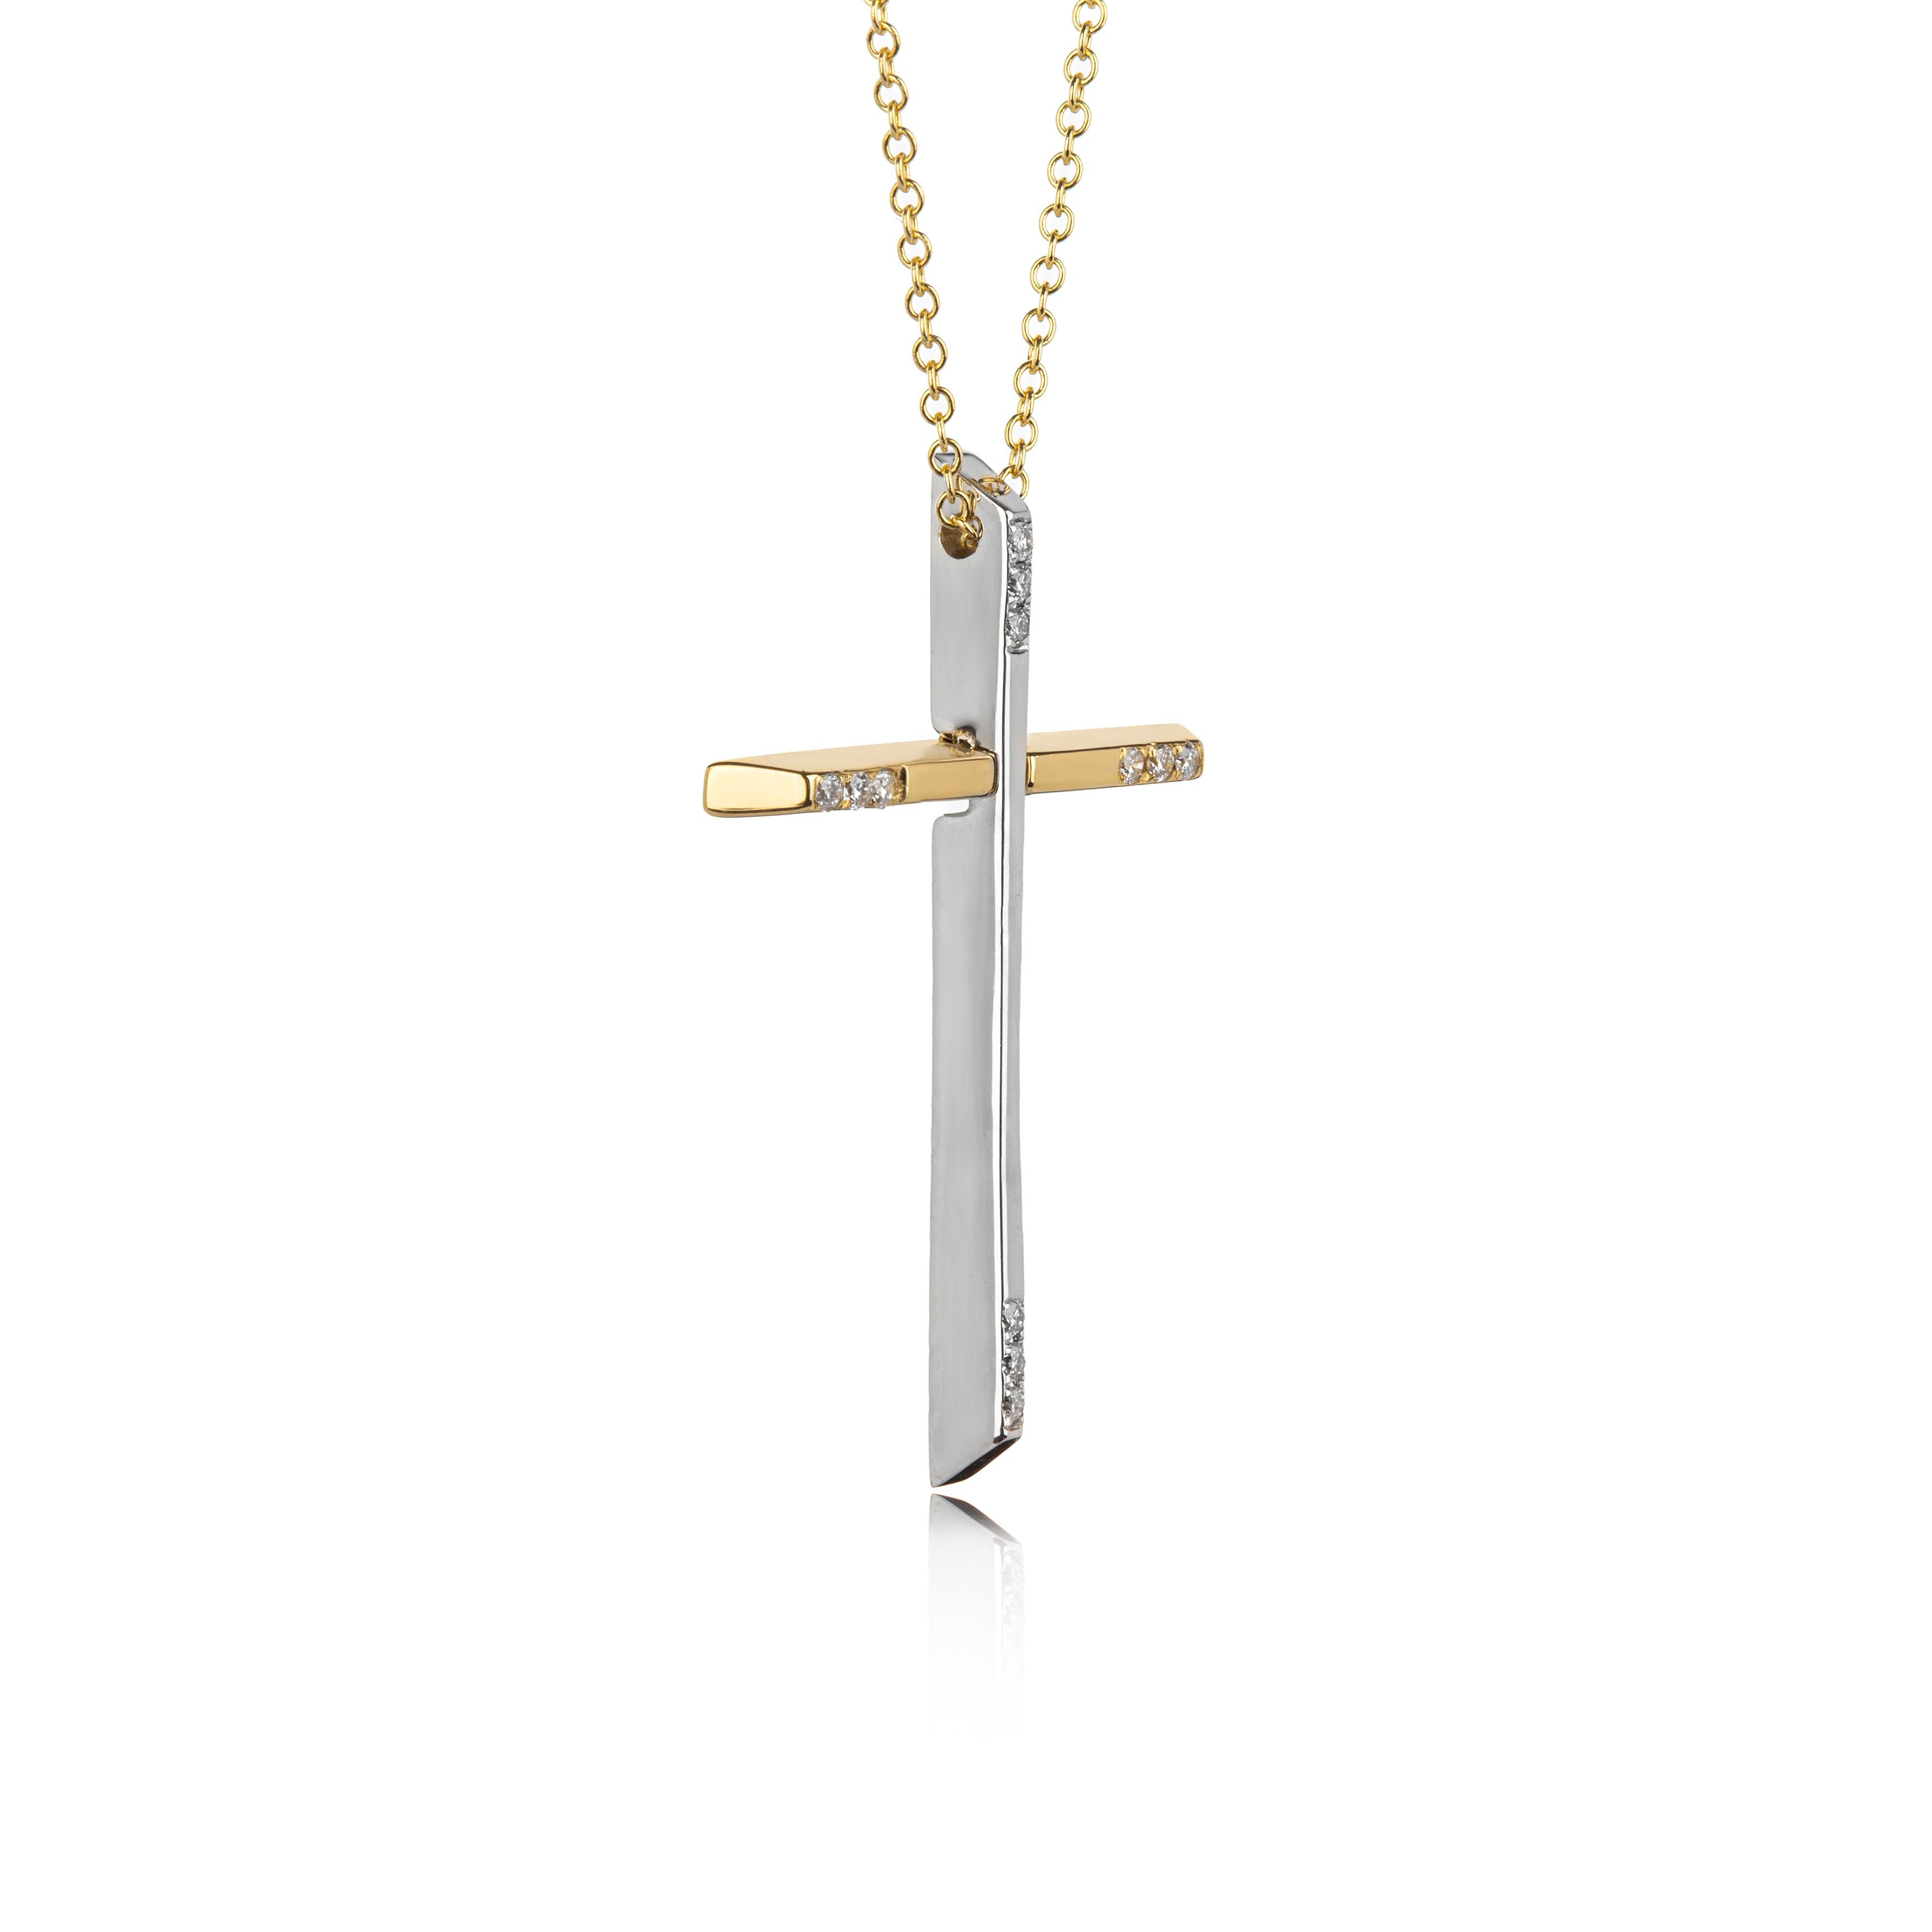 Cross and chain in yellow and white Gold 18Kt decorated with 12 Diamonds Brilliant Cut
The diamonds are 0.040ct  and the chain is rolo style.
The cross has two colors, white gold in horizontal  dimension and yellow gold in the vertical dimension.
It